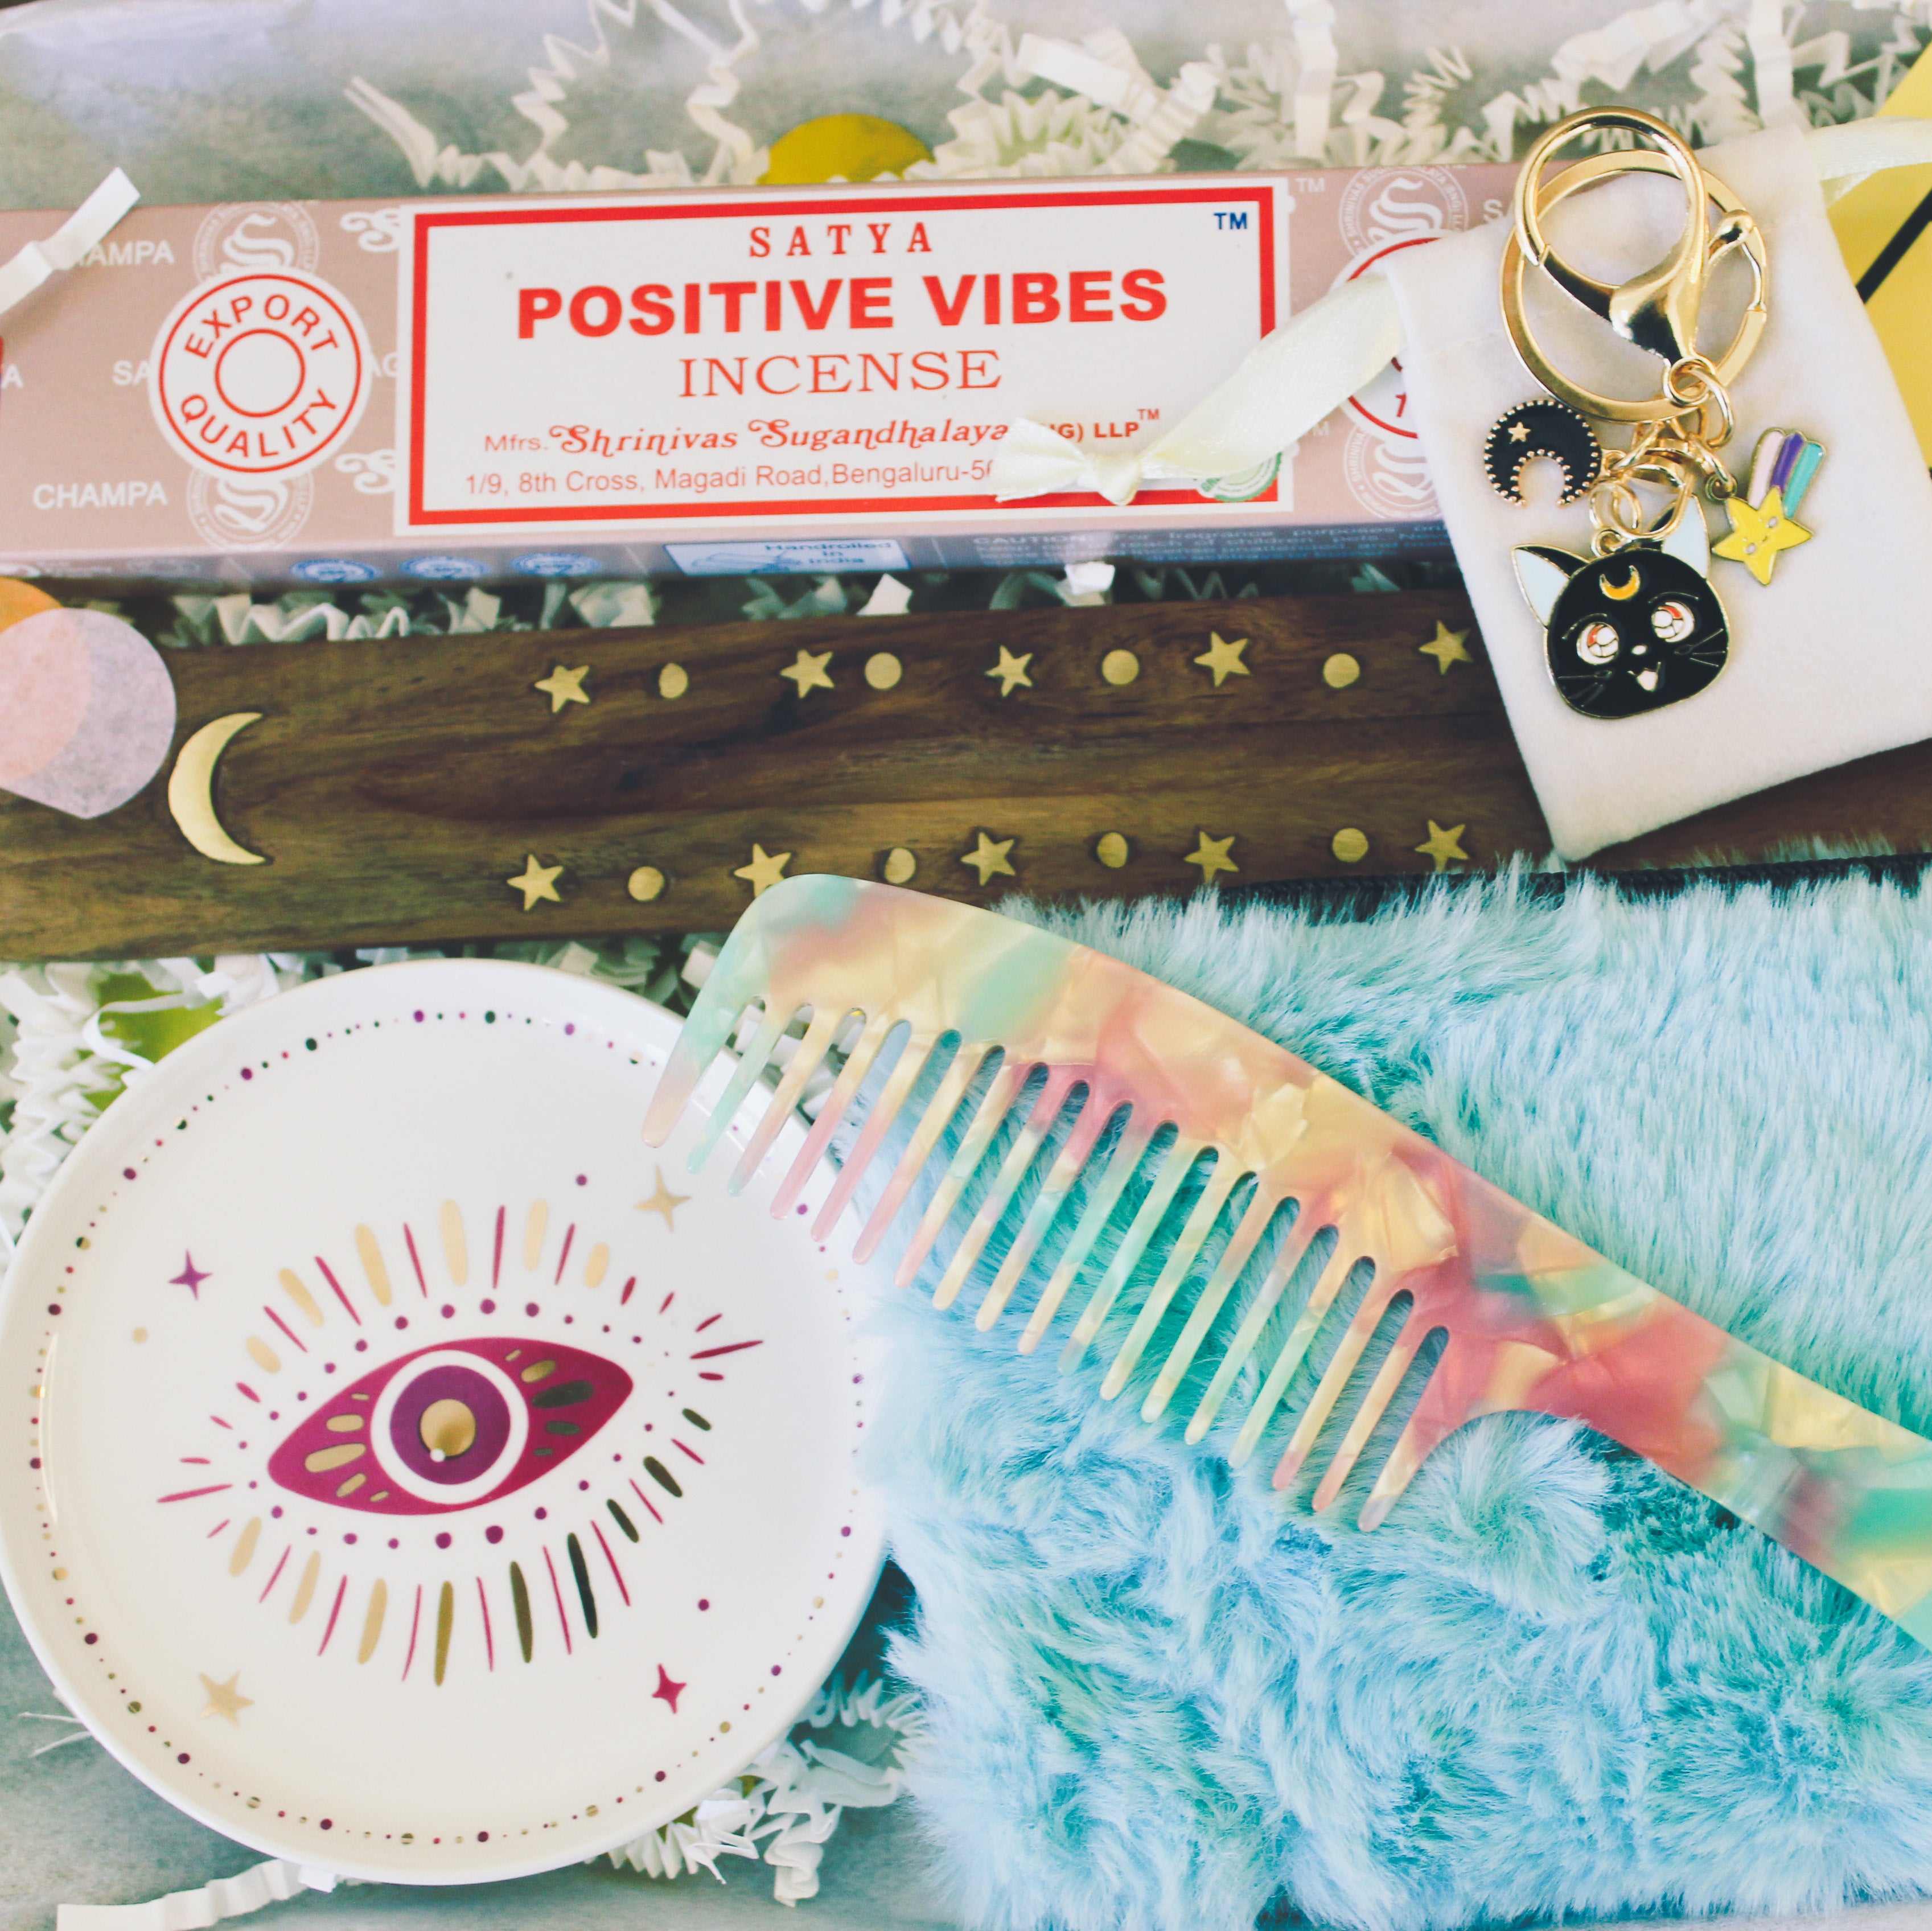 The Positive Vibes Letterbox